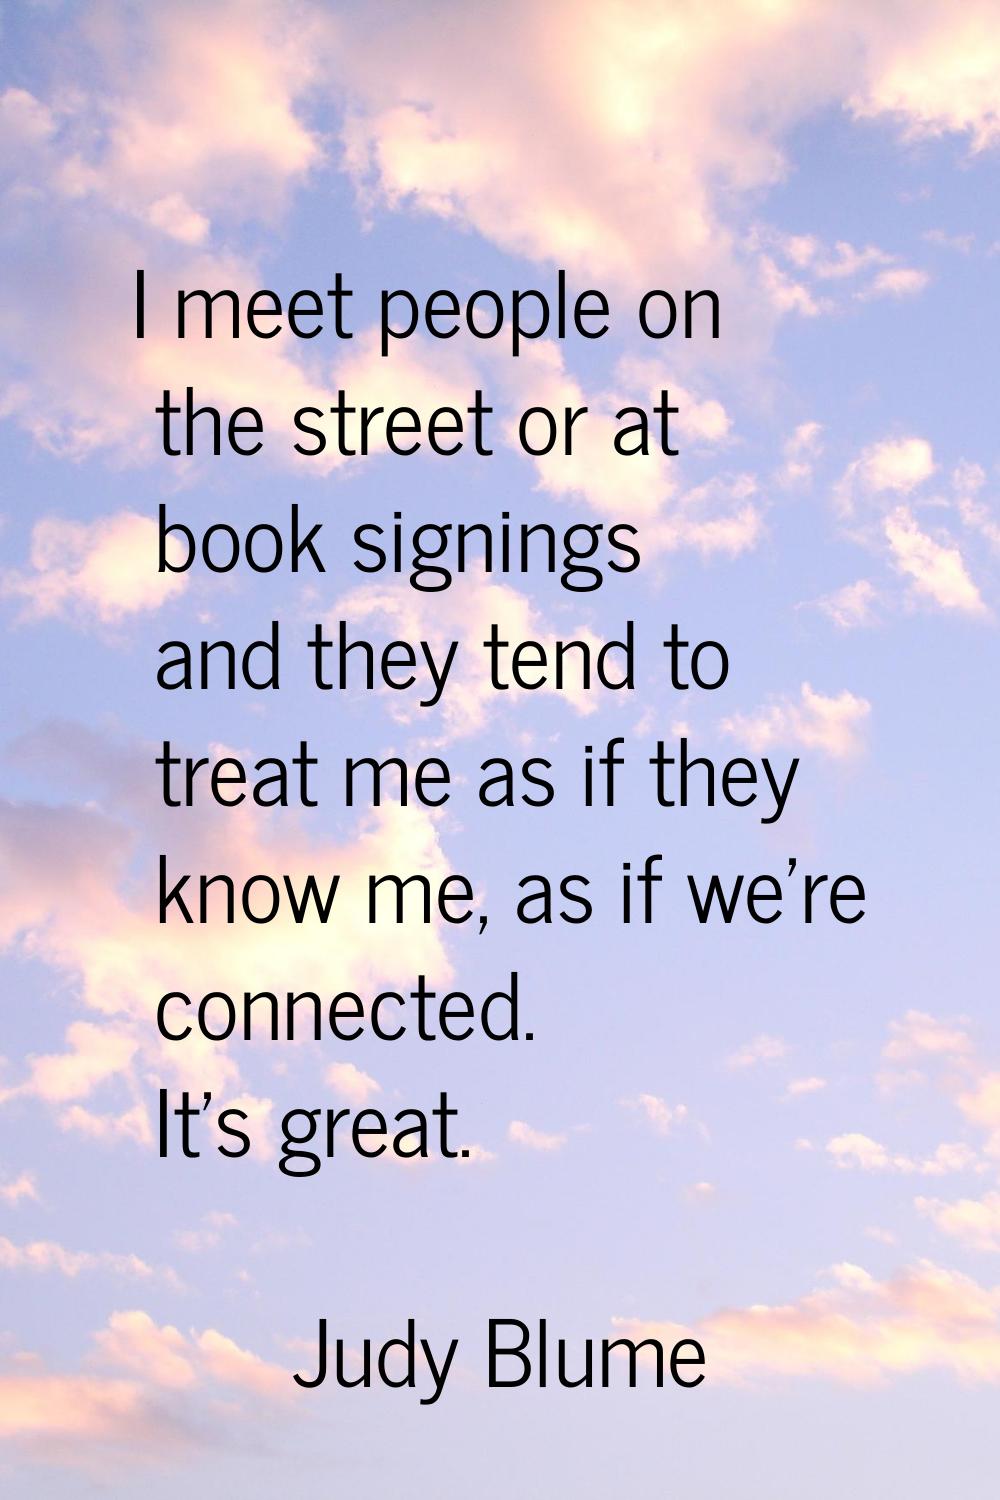 I meet people on the street or at book signings and they tend to treat me as if they know me, as if